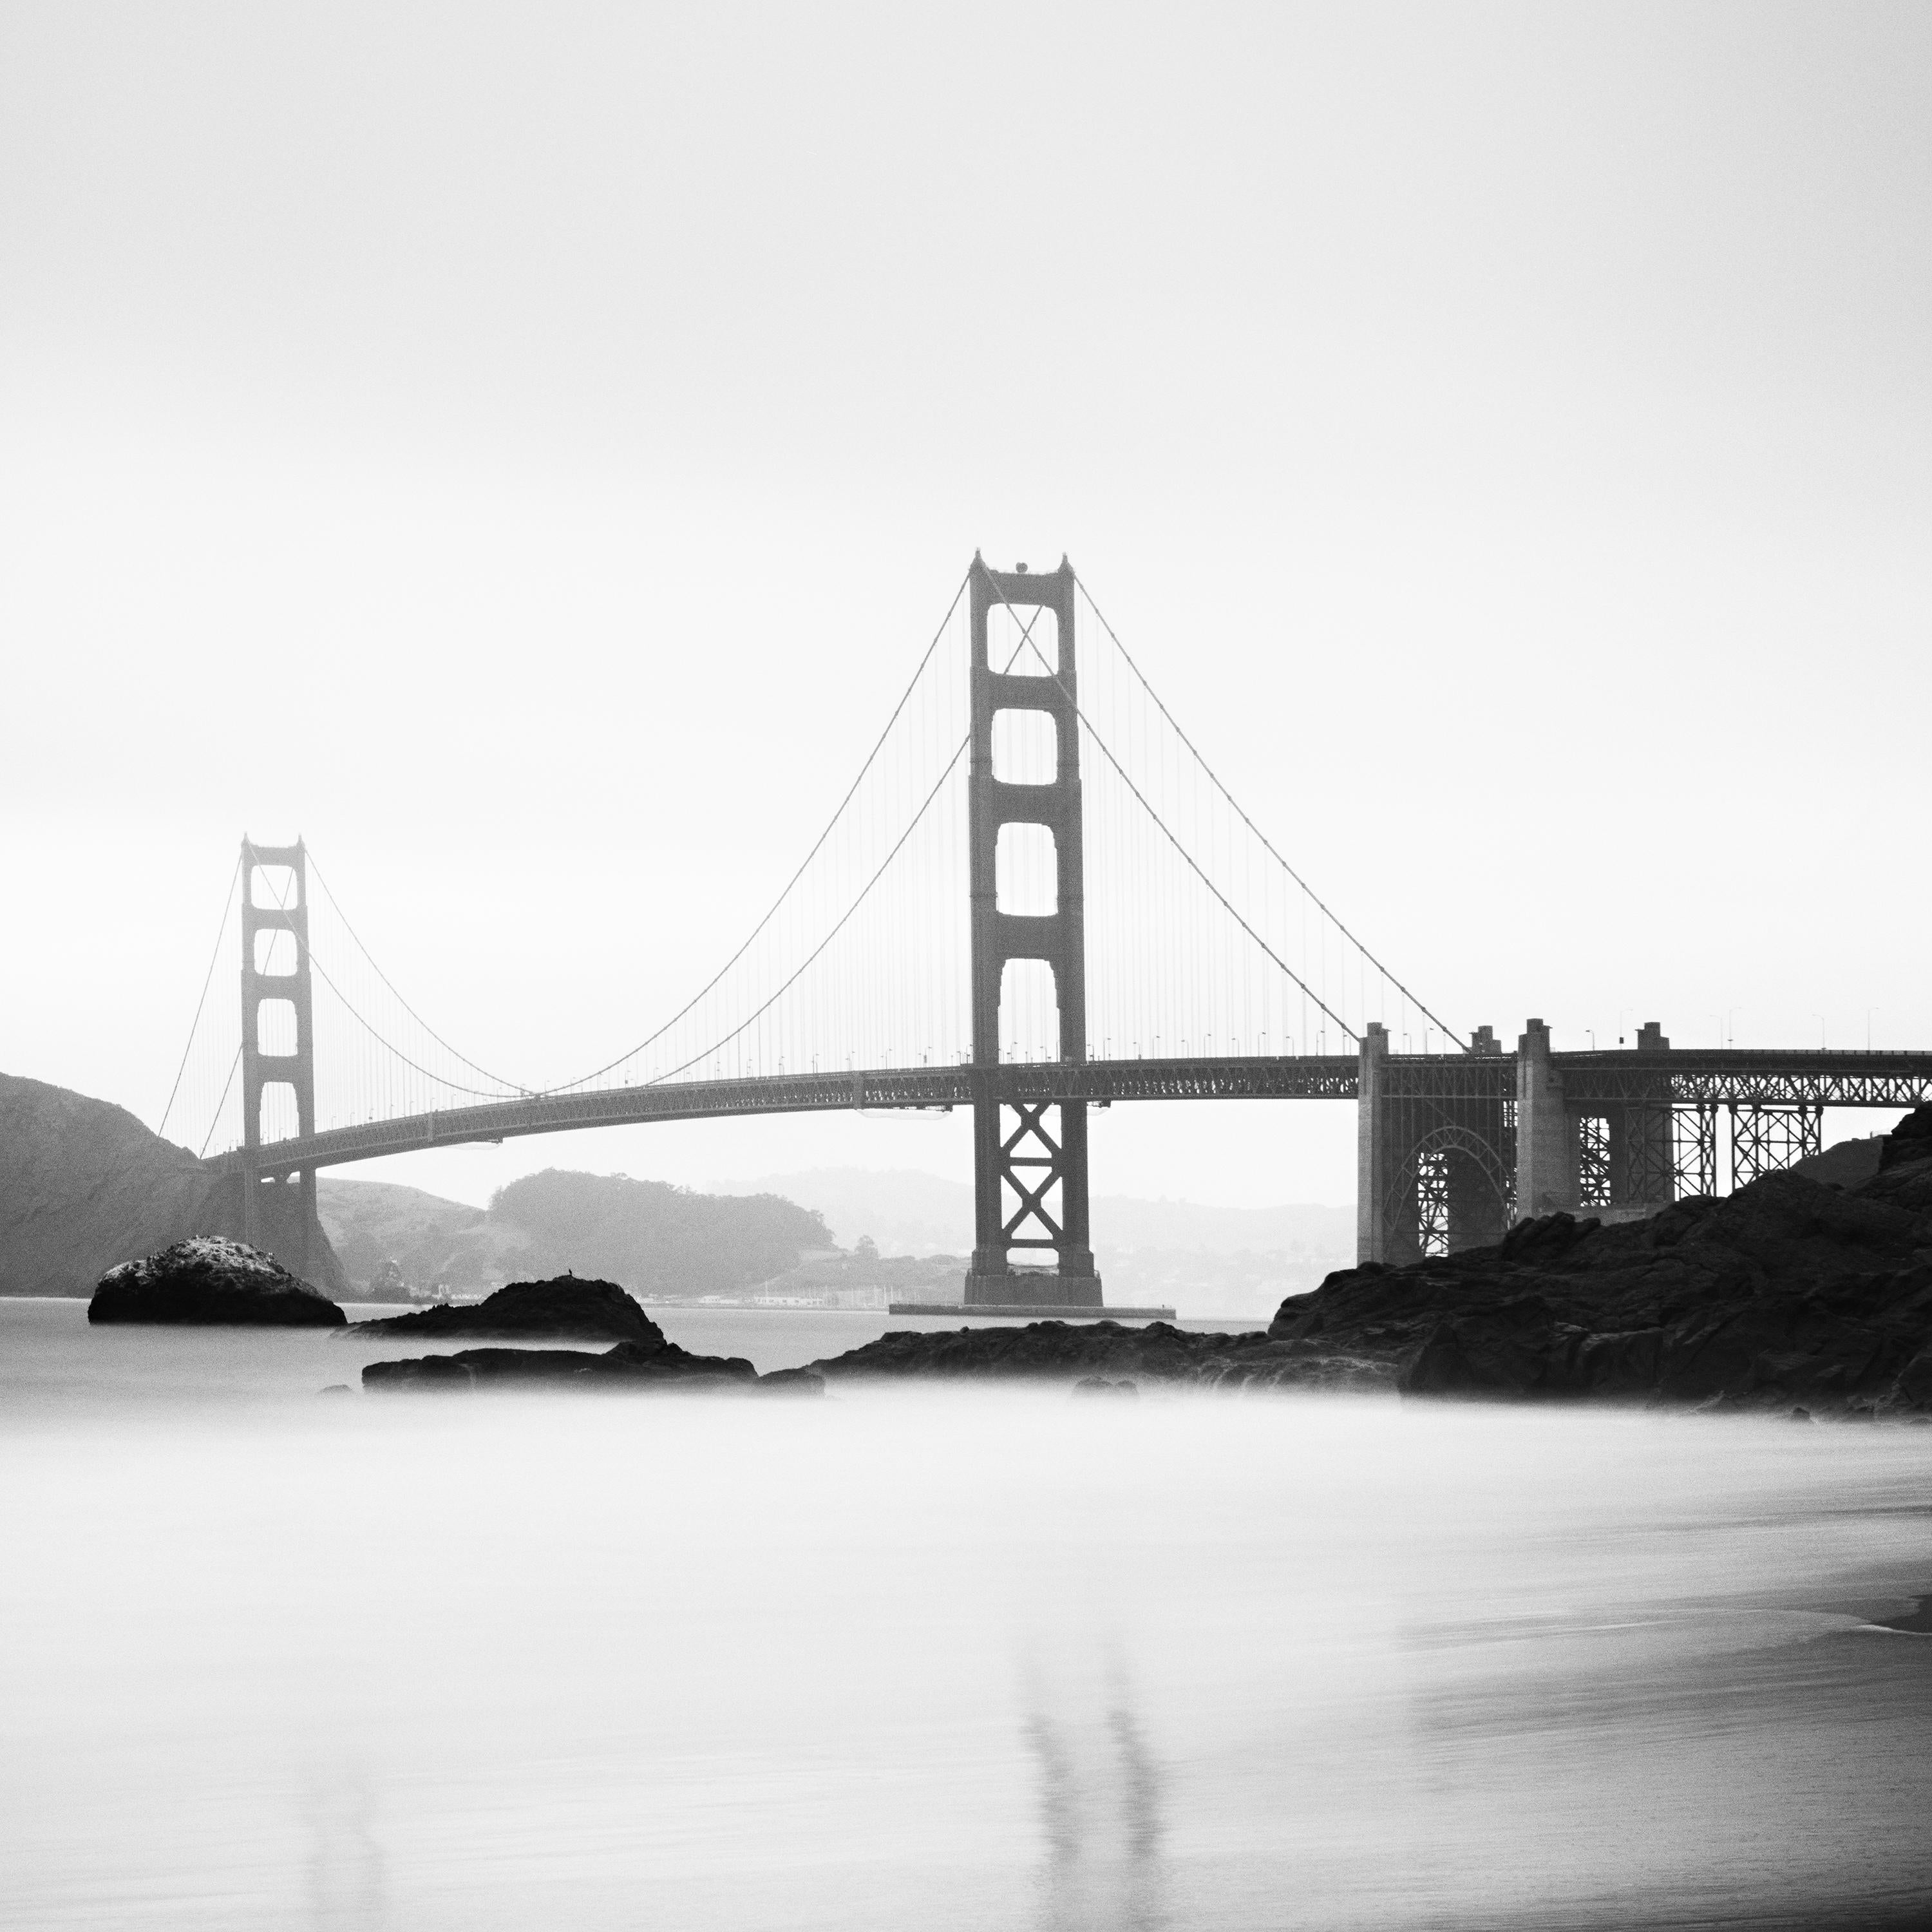 Black and white fine art cityscape - landscape photography. Marshall's Beach view of Golden Gate Bridge, San Francisco, USA. Archival pigment ink print, edition of 8. Signed, titled, dated and numbered by artist. Certificate of authenticity